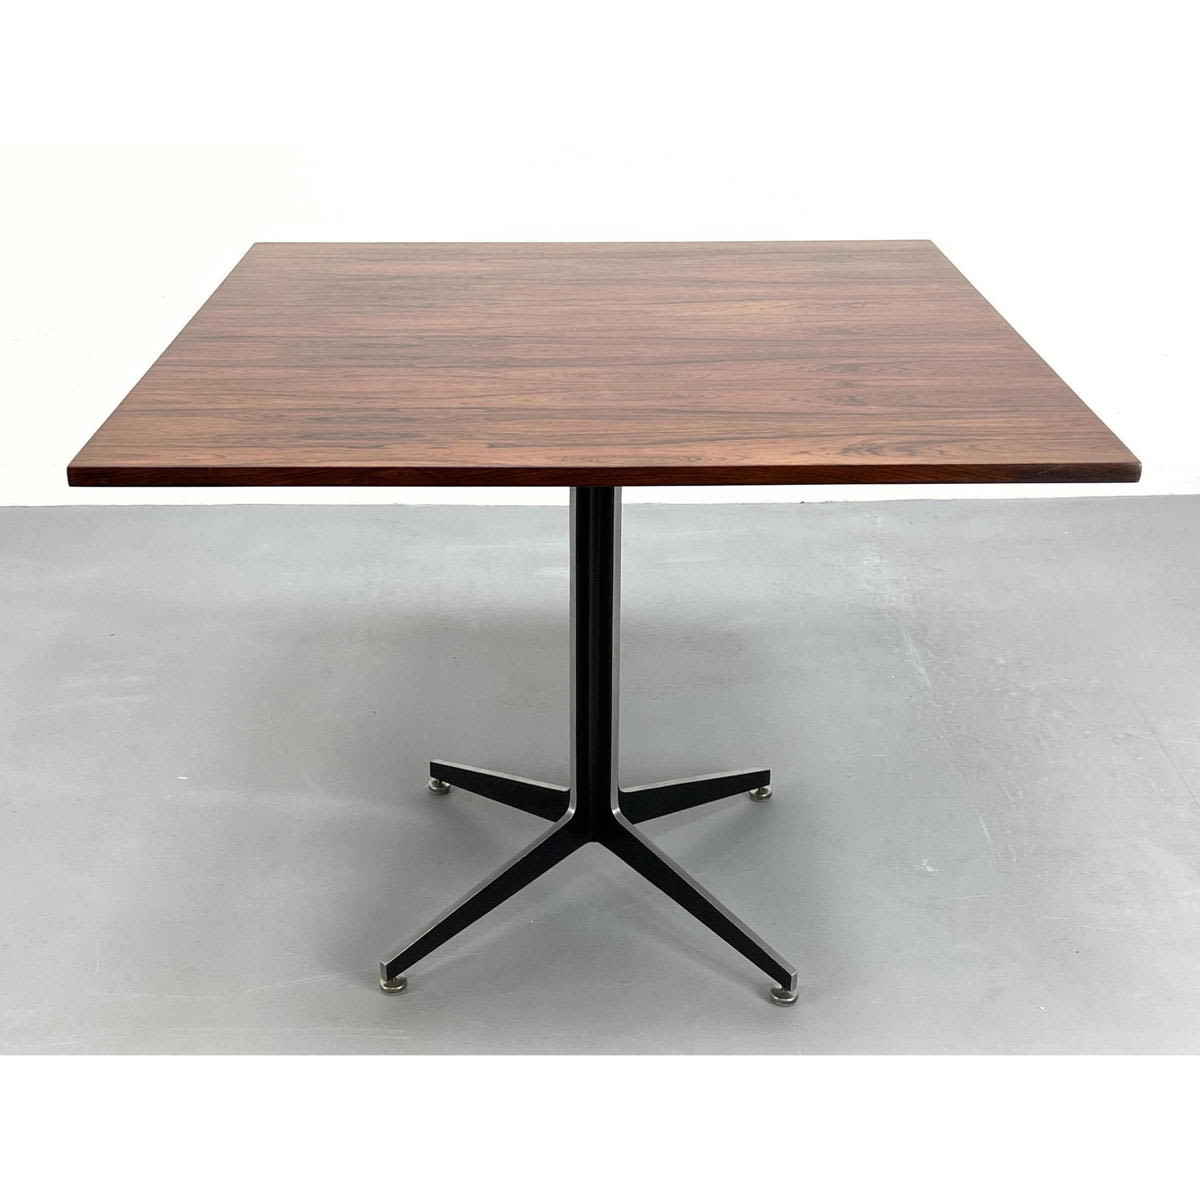 WARD BENNETT Square Dining Table  3accc9